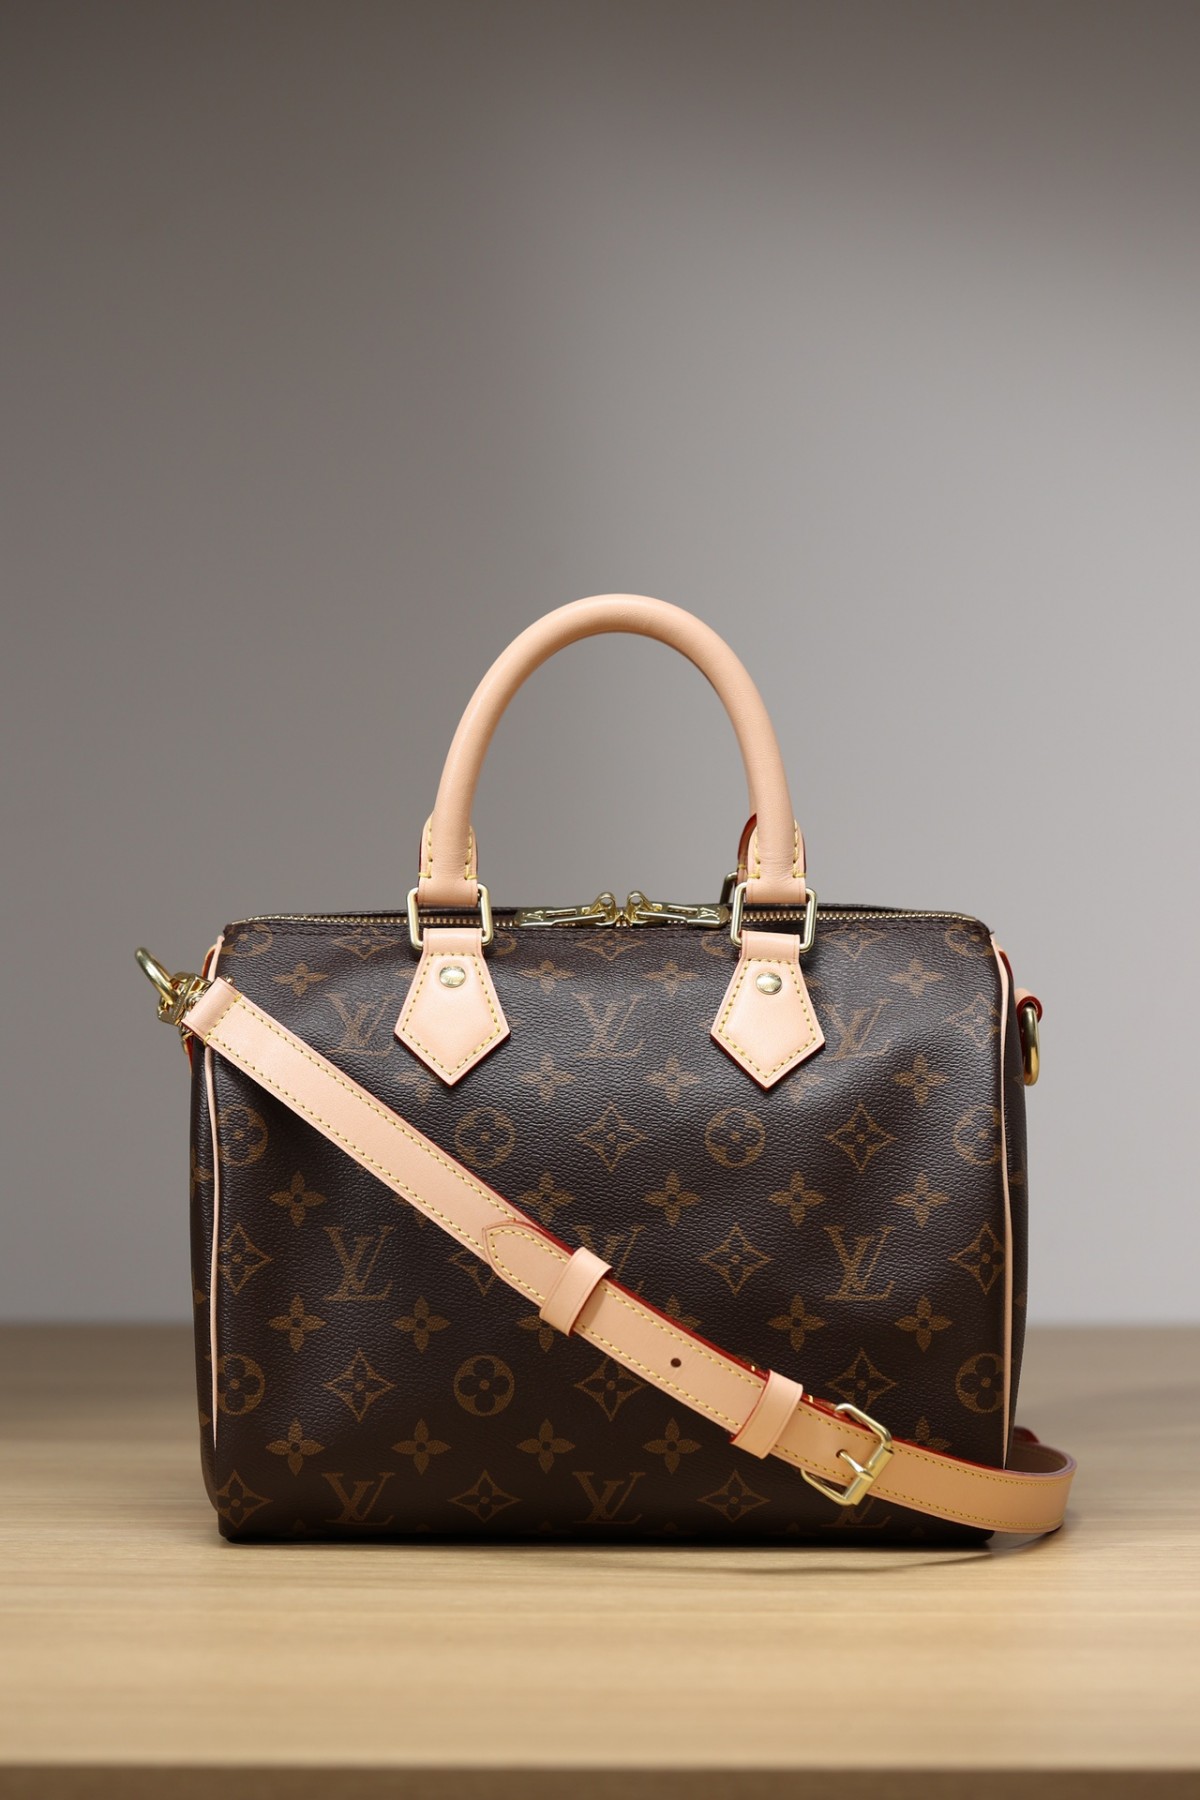 How good quality is a M41113 Speedy 25 bag? (2023 Updated)-Best Quality Fake Louis Vuitton Bag Online Store, Replica designer bag ru